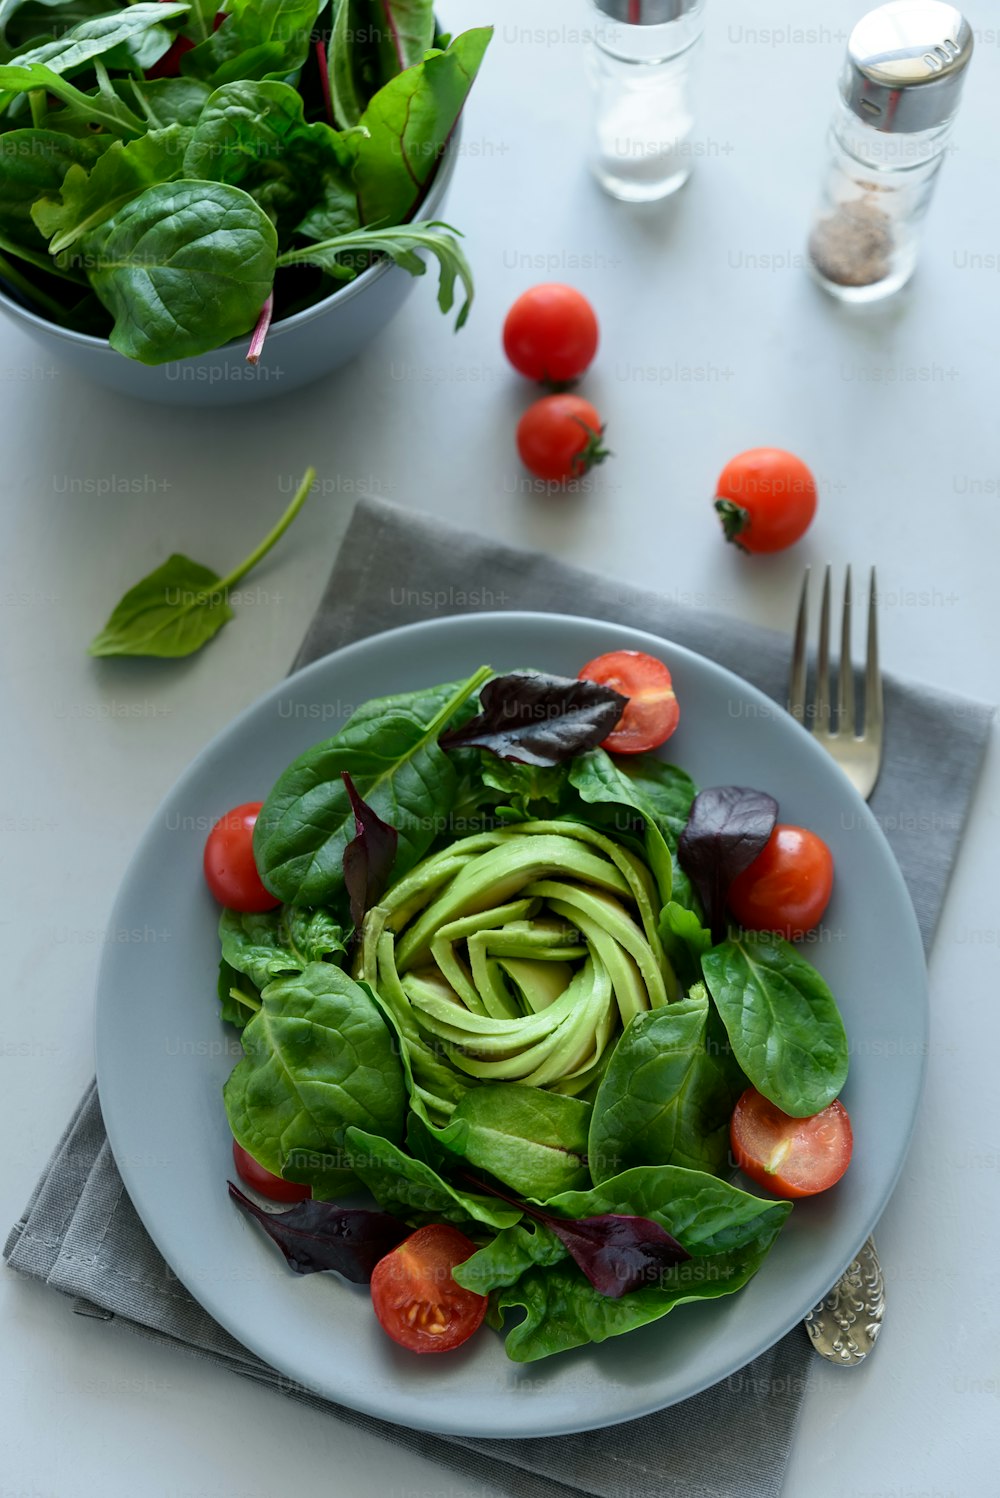 Salad mix with avocado, spinach, tomatoes and beet leaves on gray wooden background. Vegetarian food concept. Selective focus.